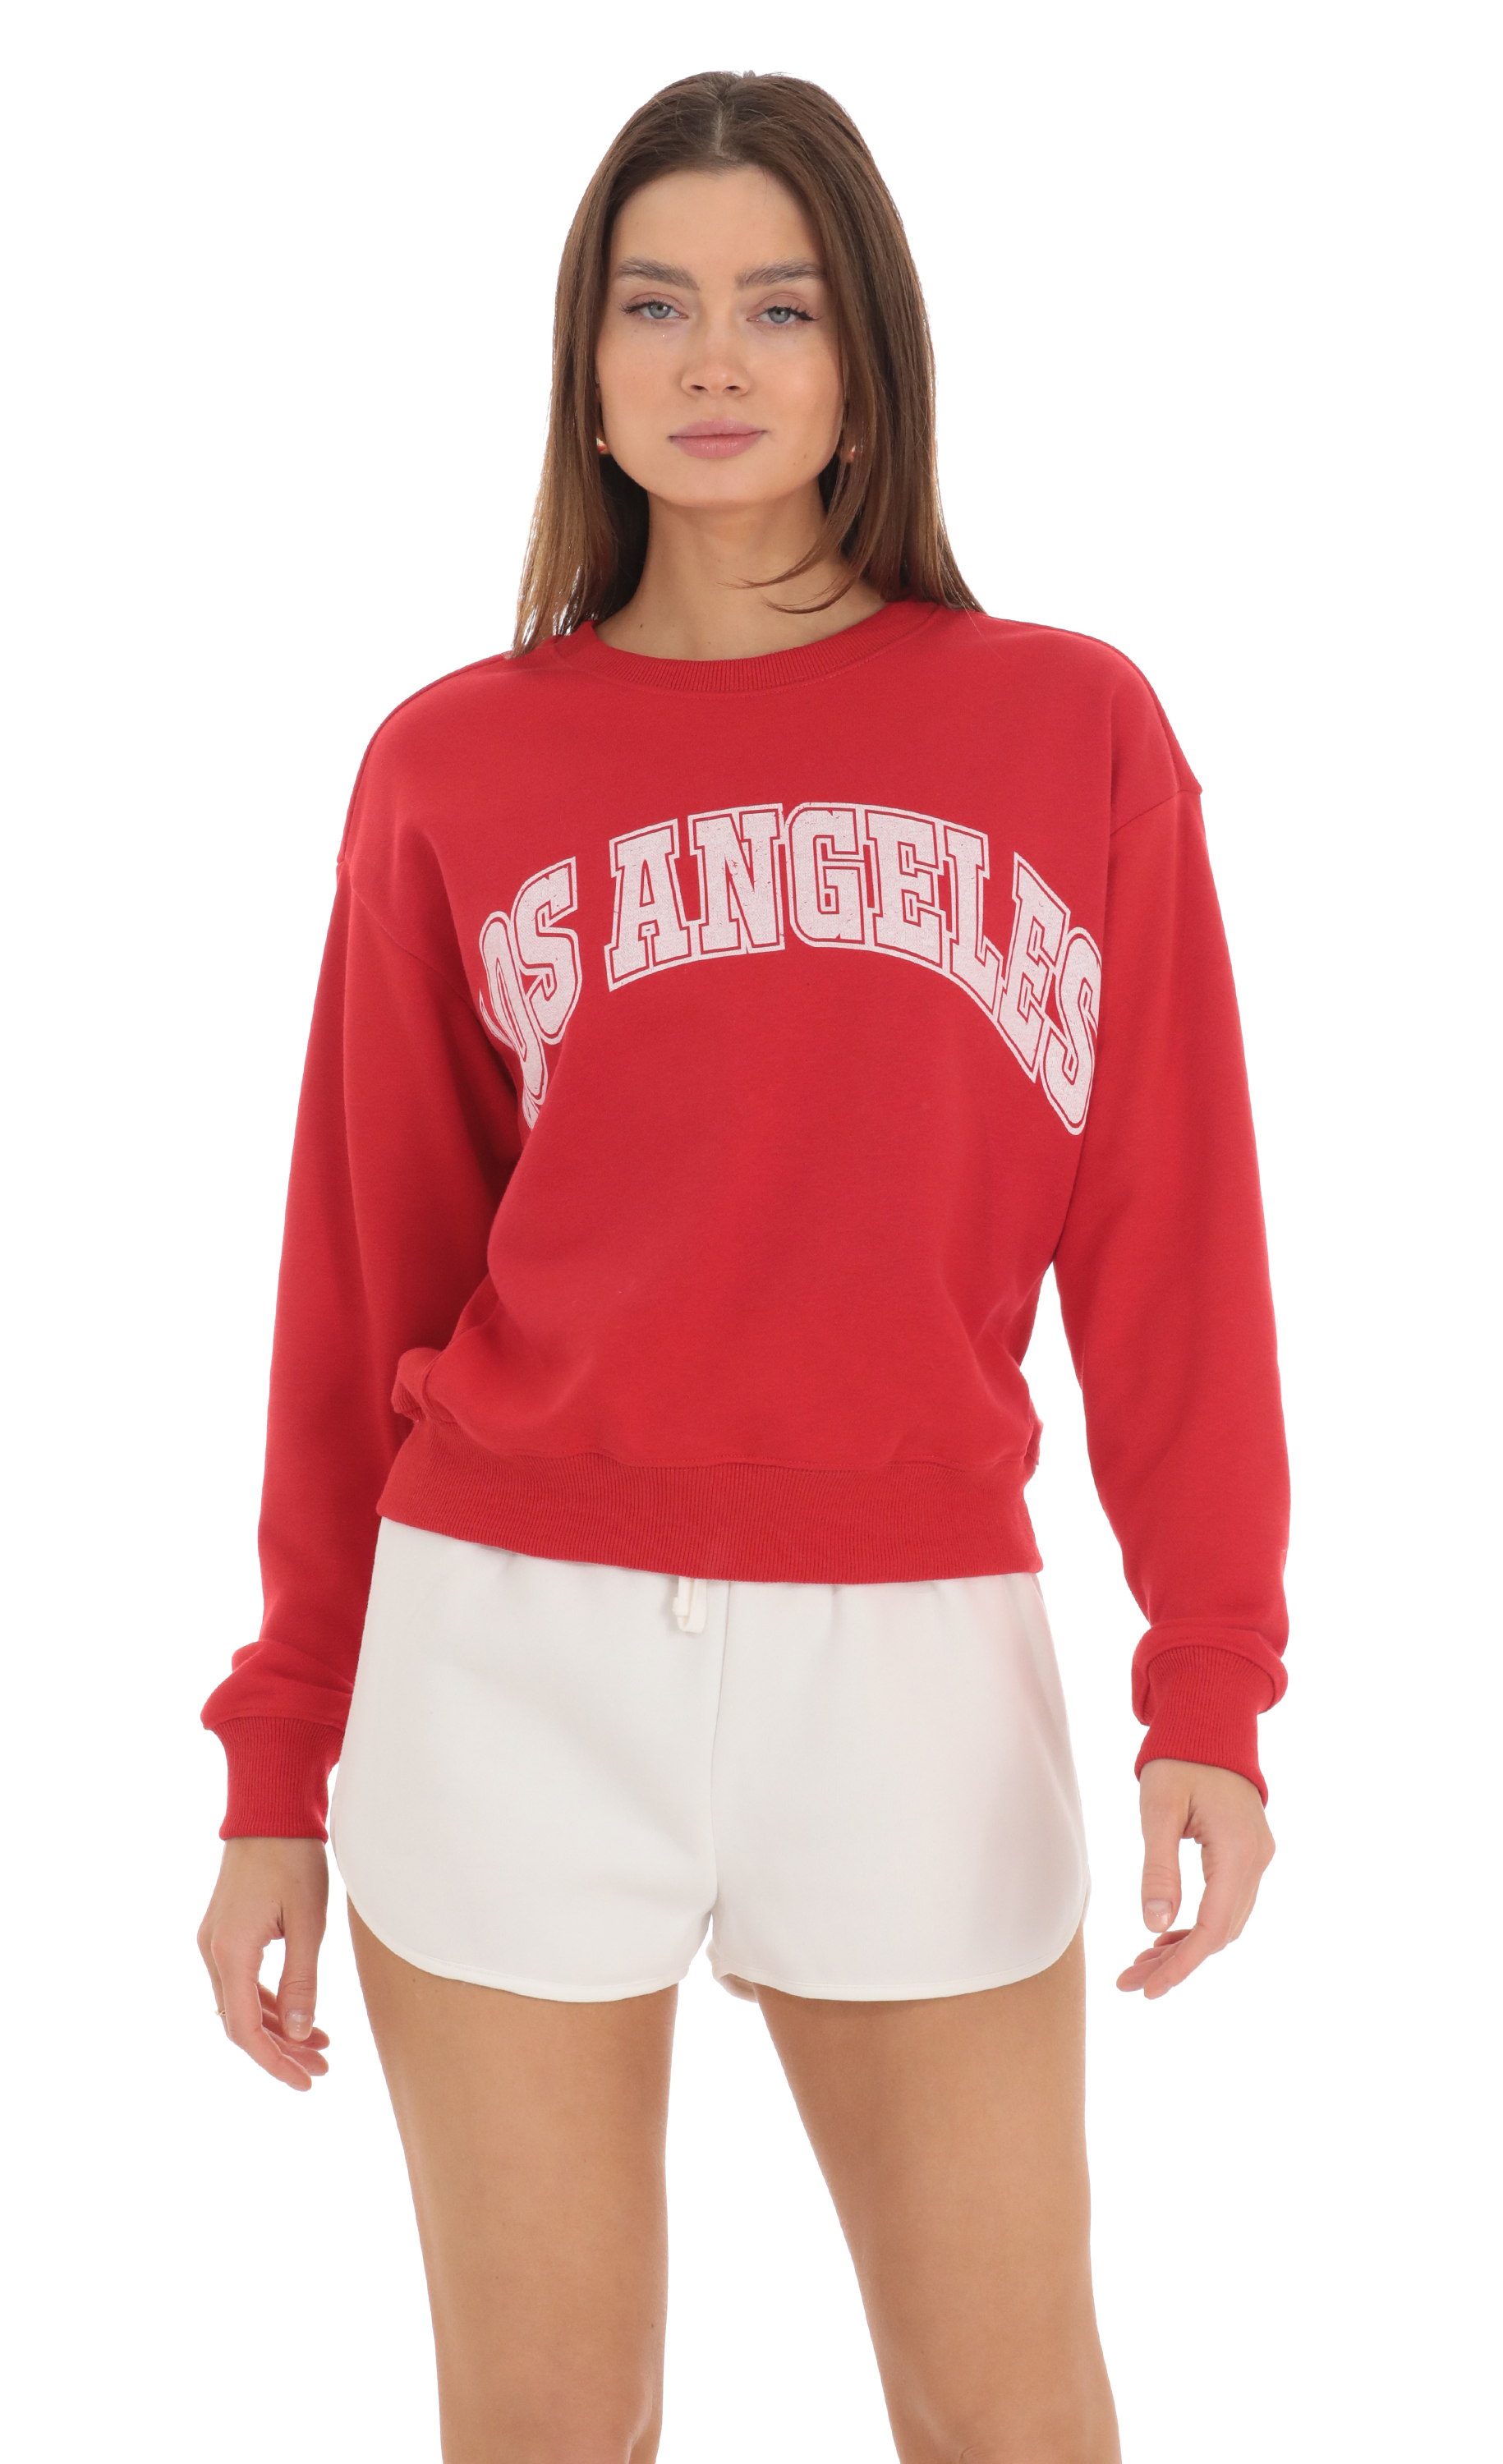 Los Angeles Jumper in Red